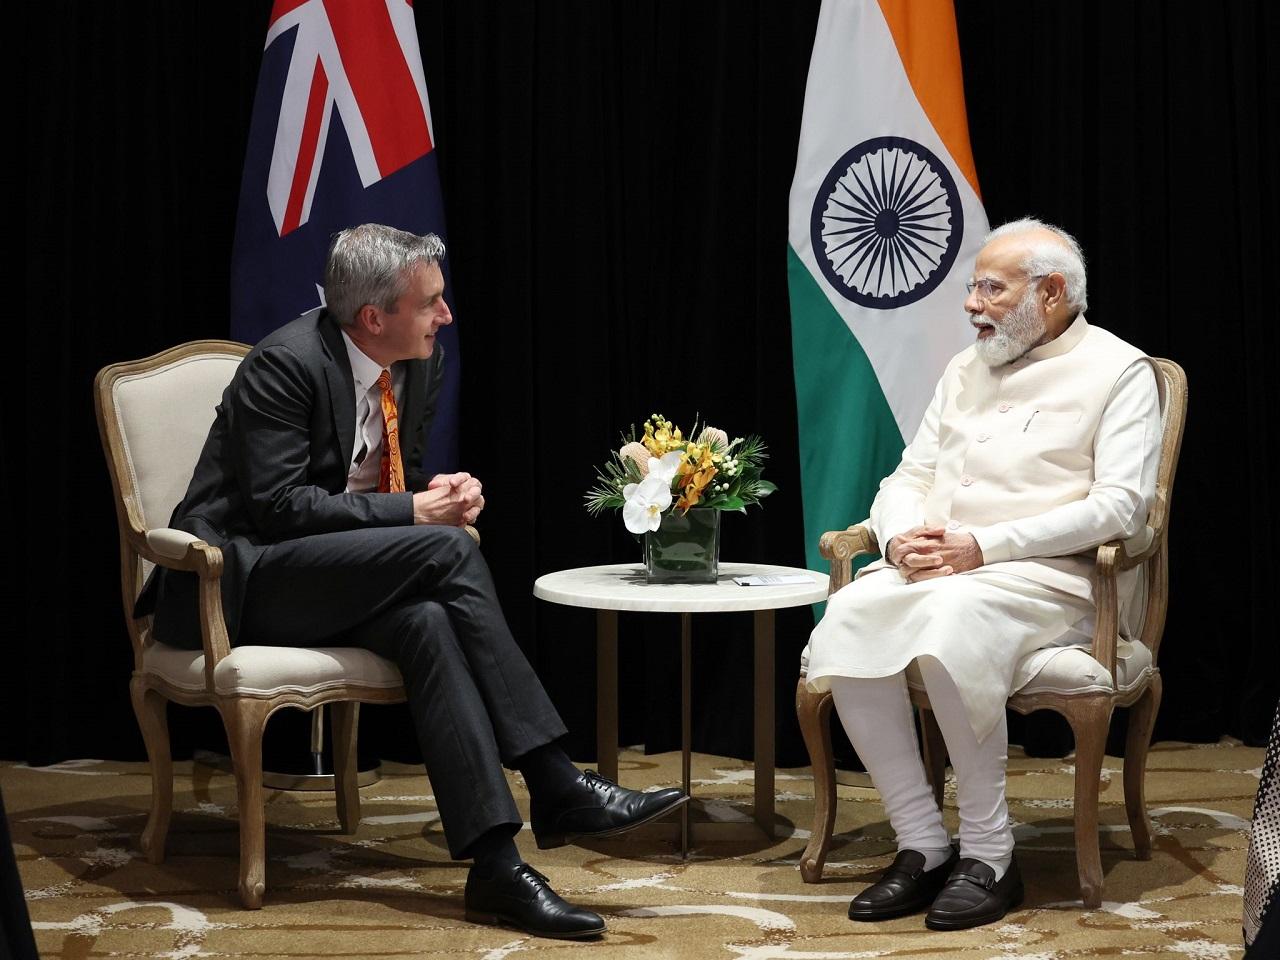 PM Modi arrived in Sydney on Monday for the third and final leg of his three-nation tour during which he will hold talks with his Australian counterpart Anthony Albanese and attend a community event to celebrate the country's dynamic, diverse Indian diaspora